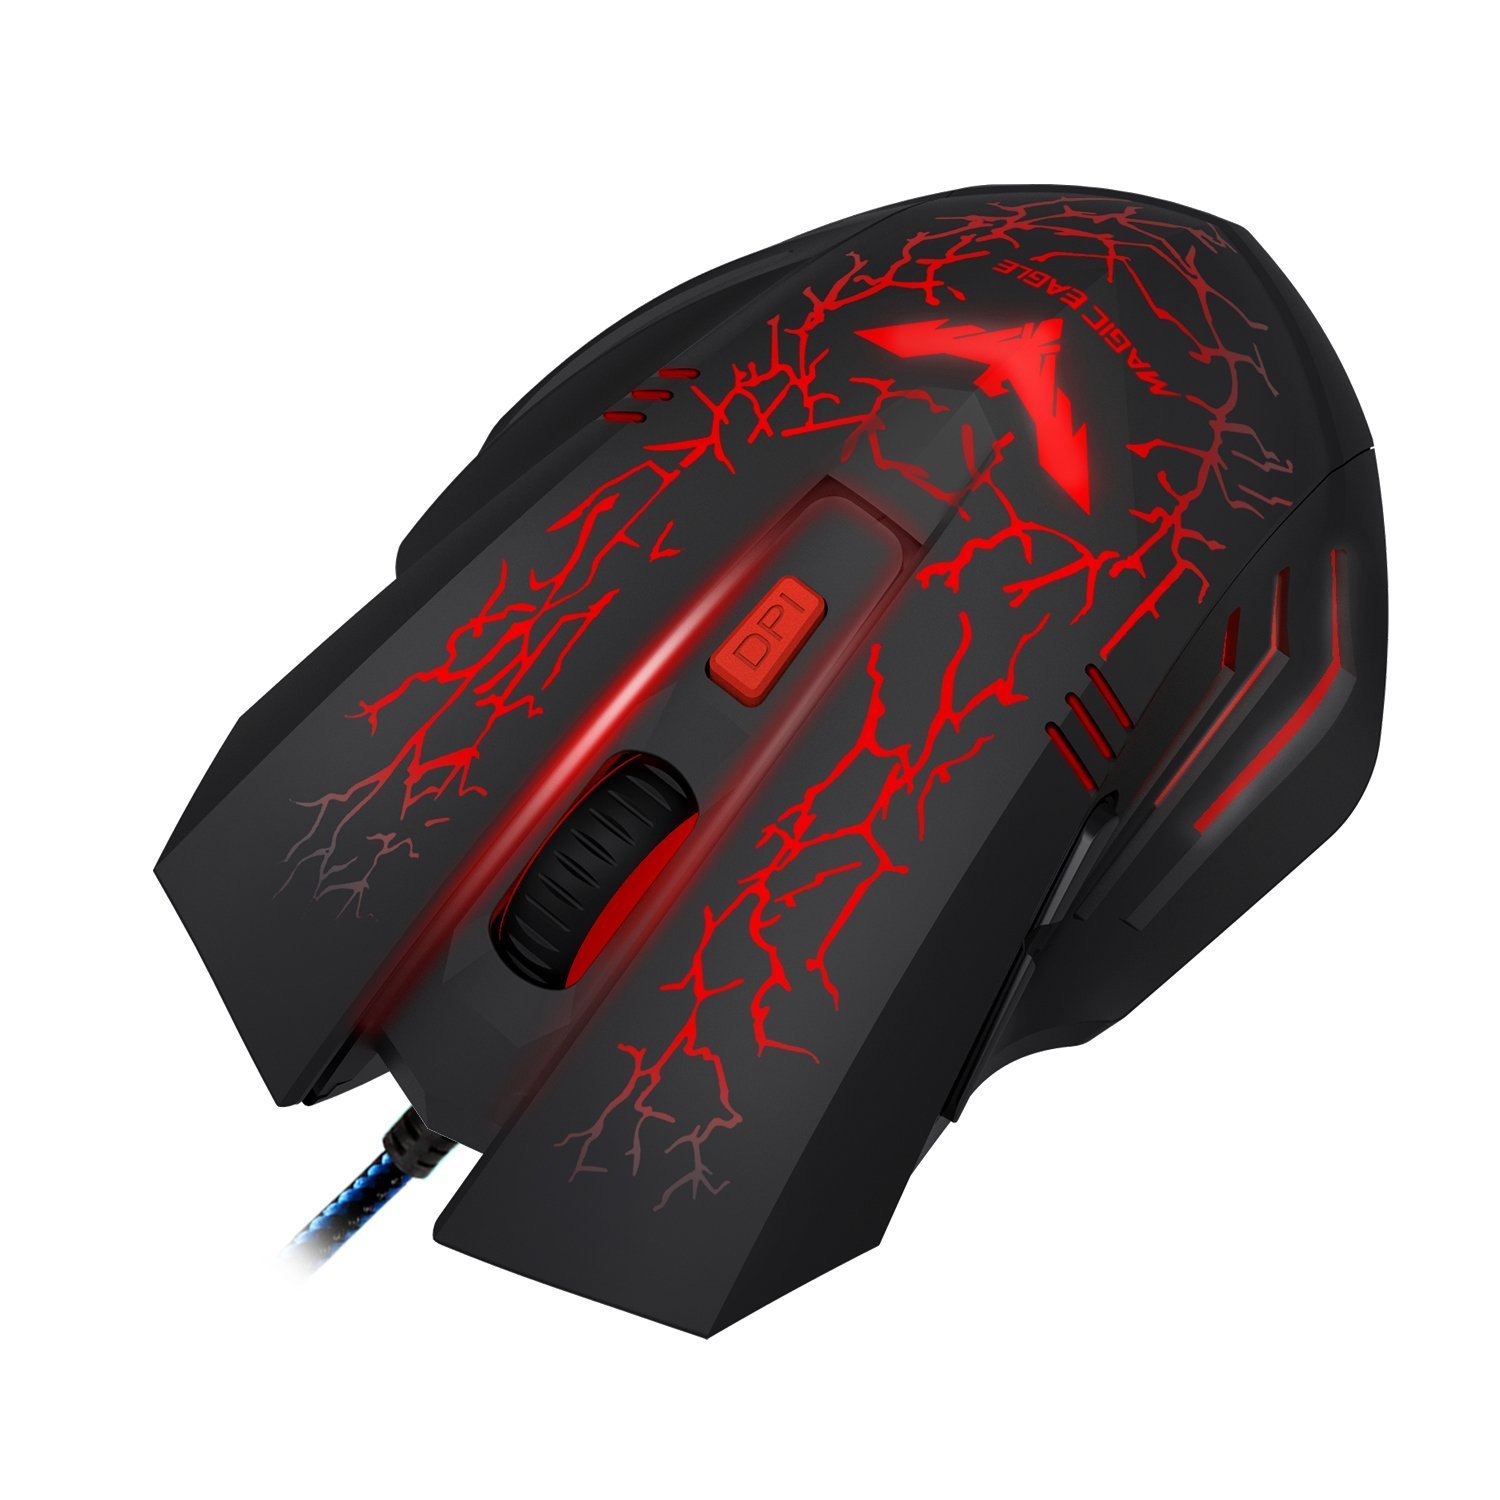 Havit Magic Eagle Gaming Mousereview image